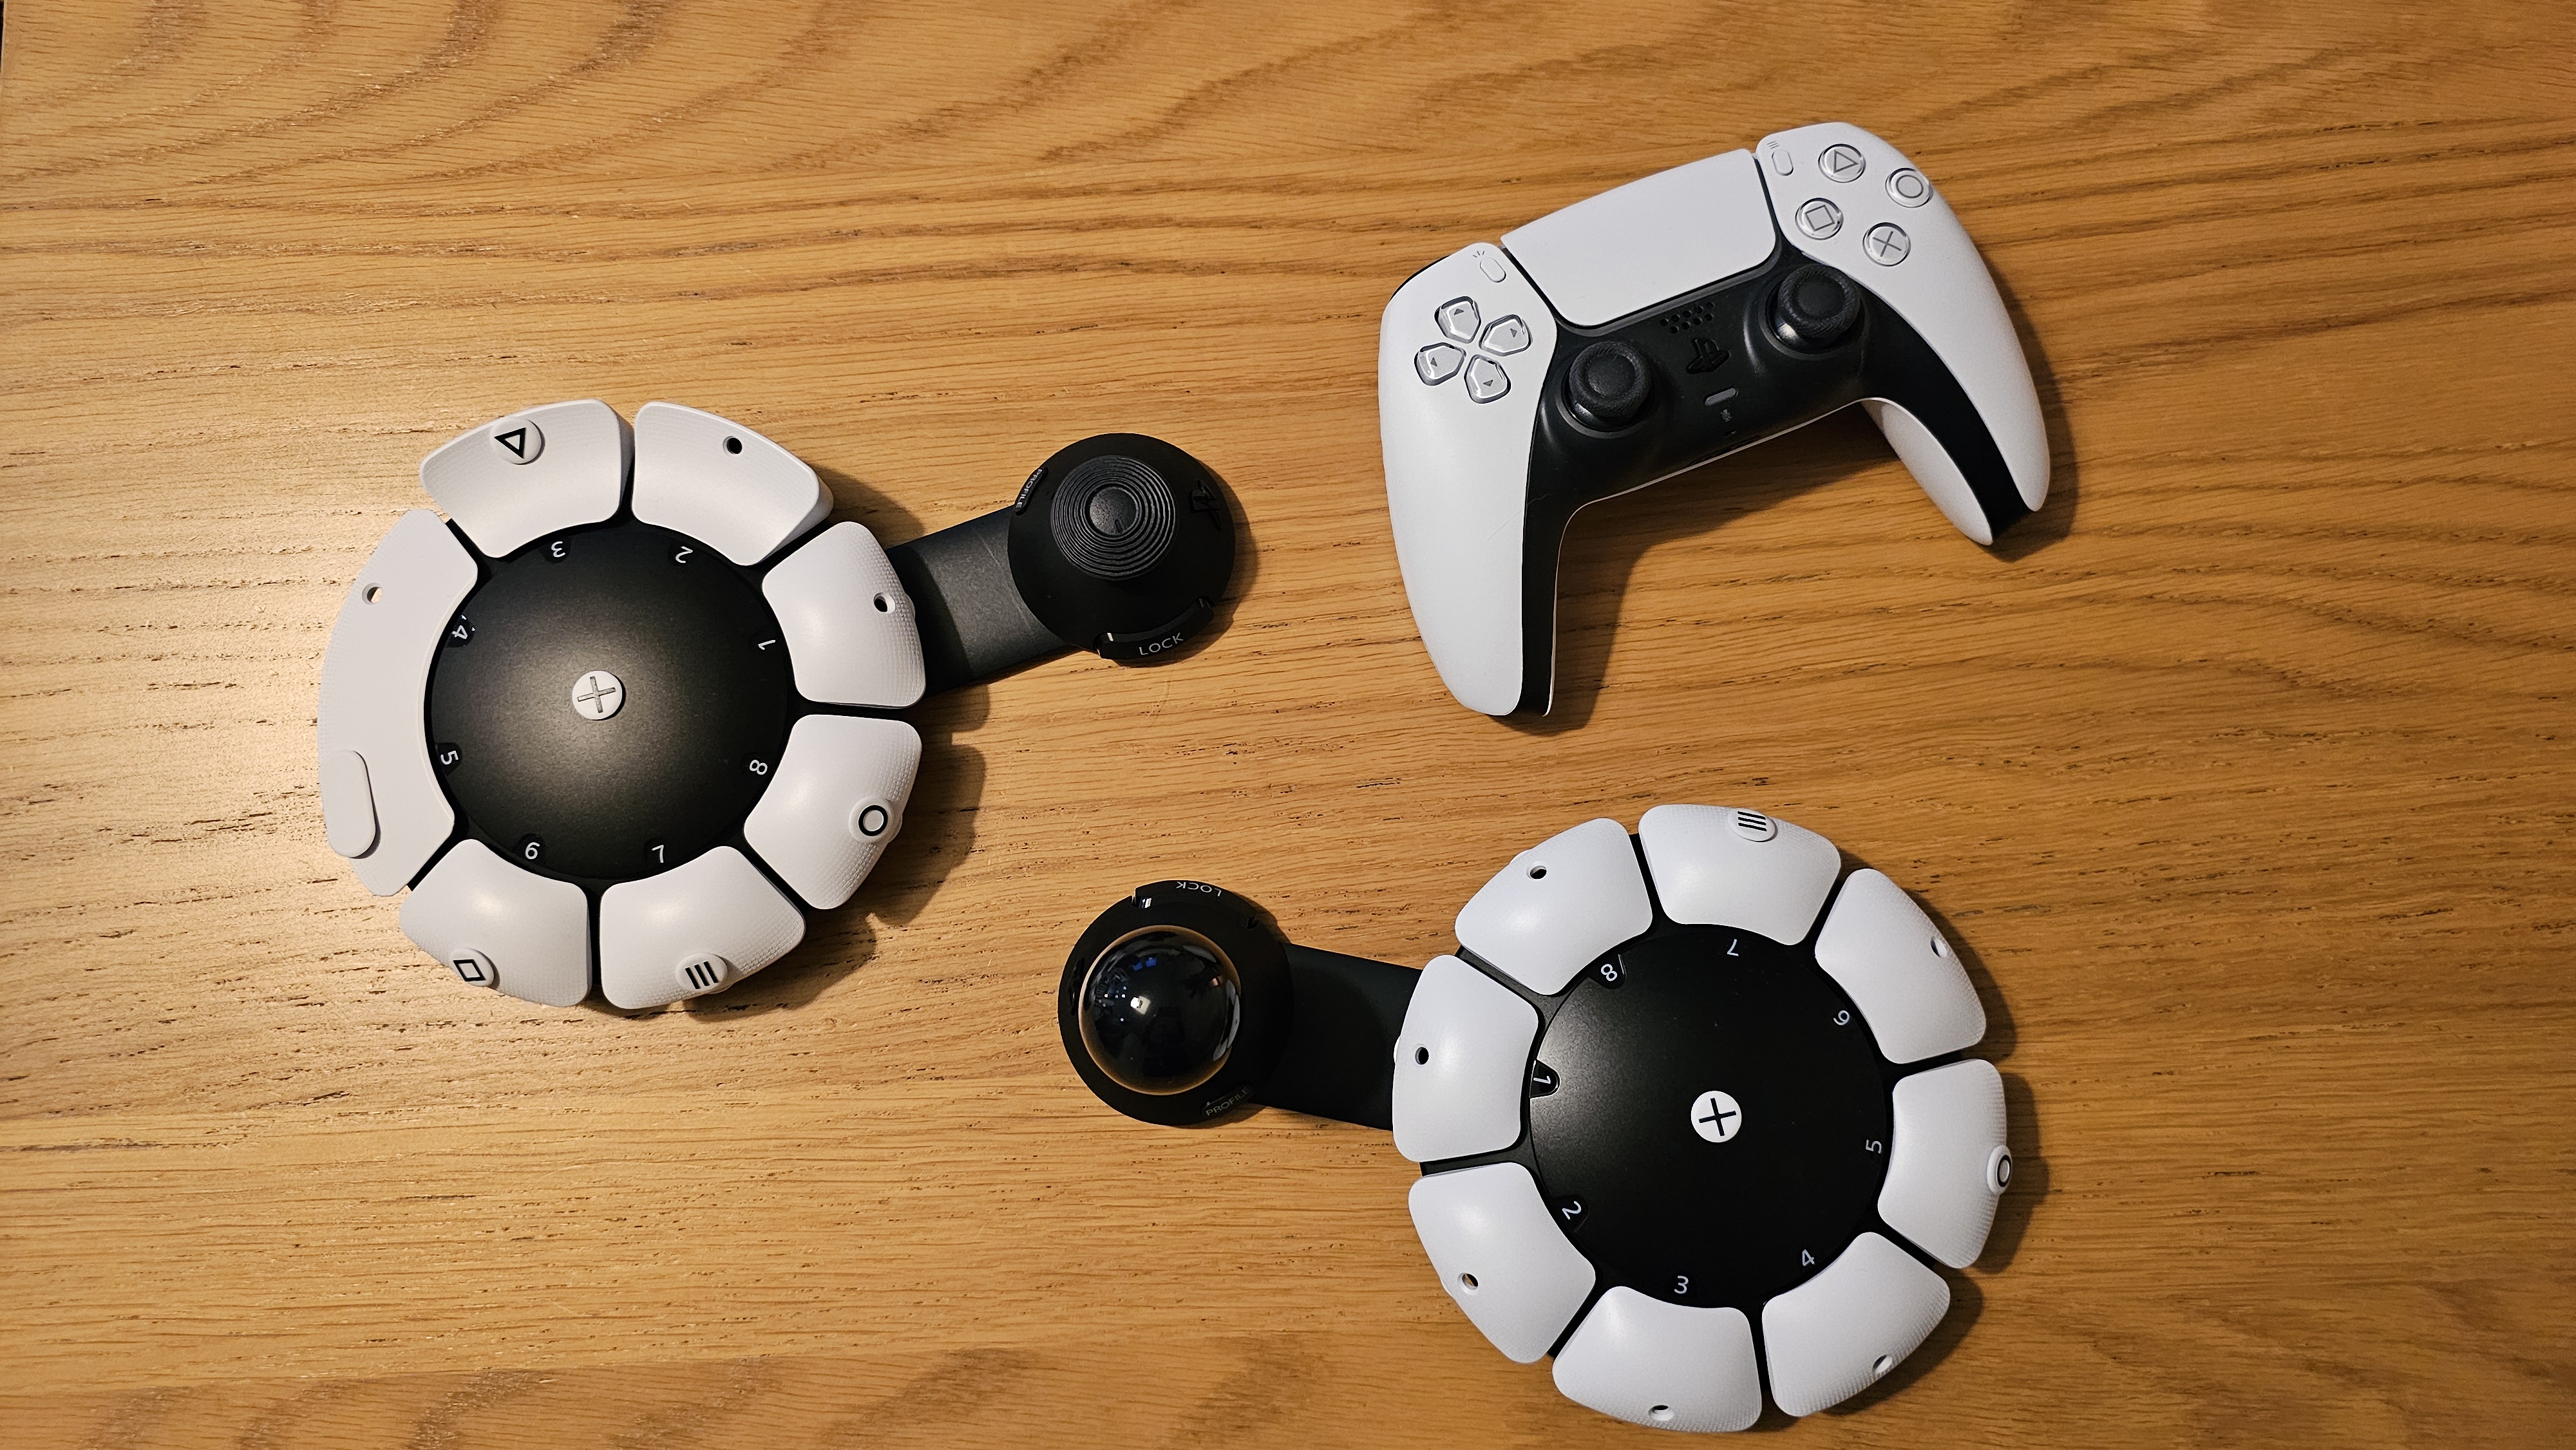 Two PlayStation Access controllers and a DualSense controller on a wooden surface